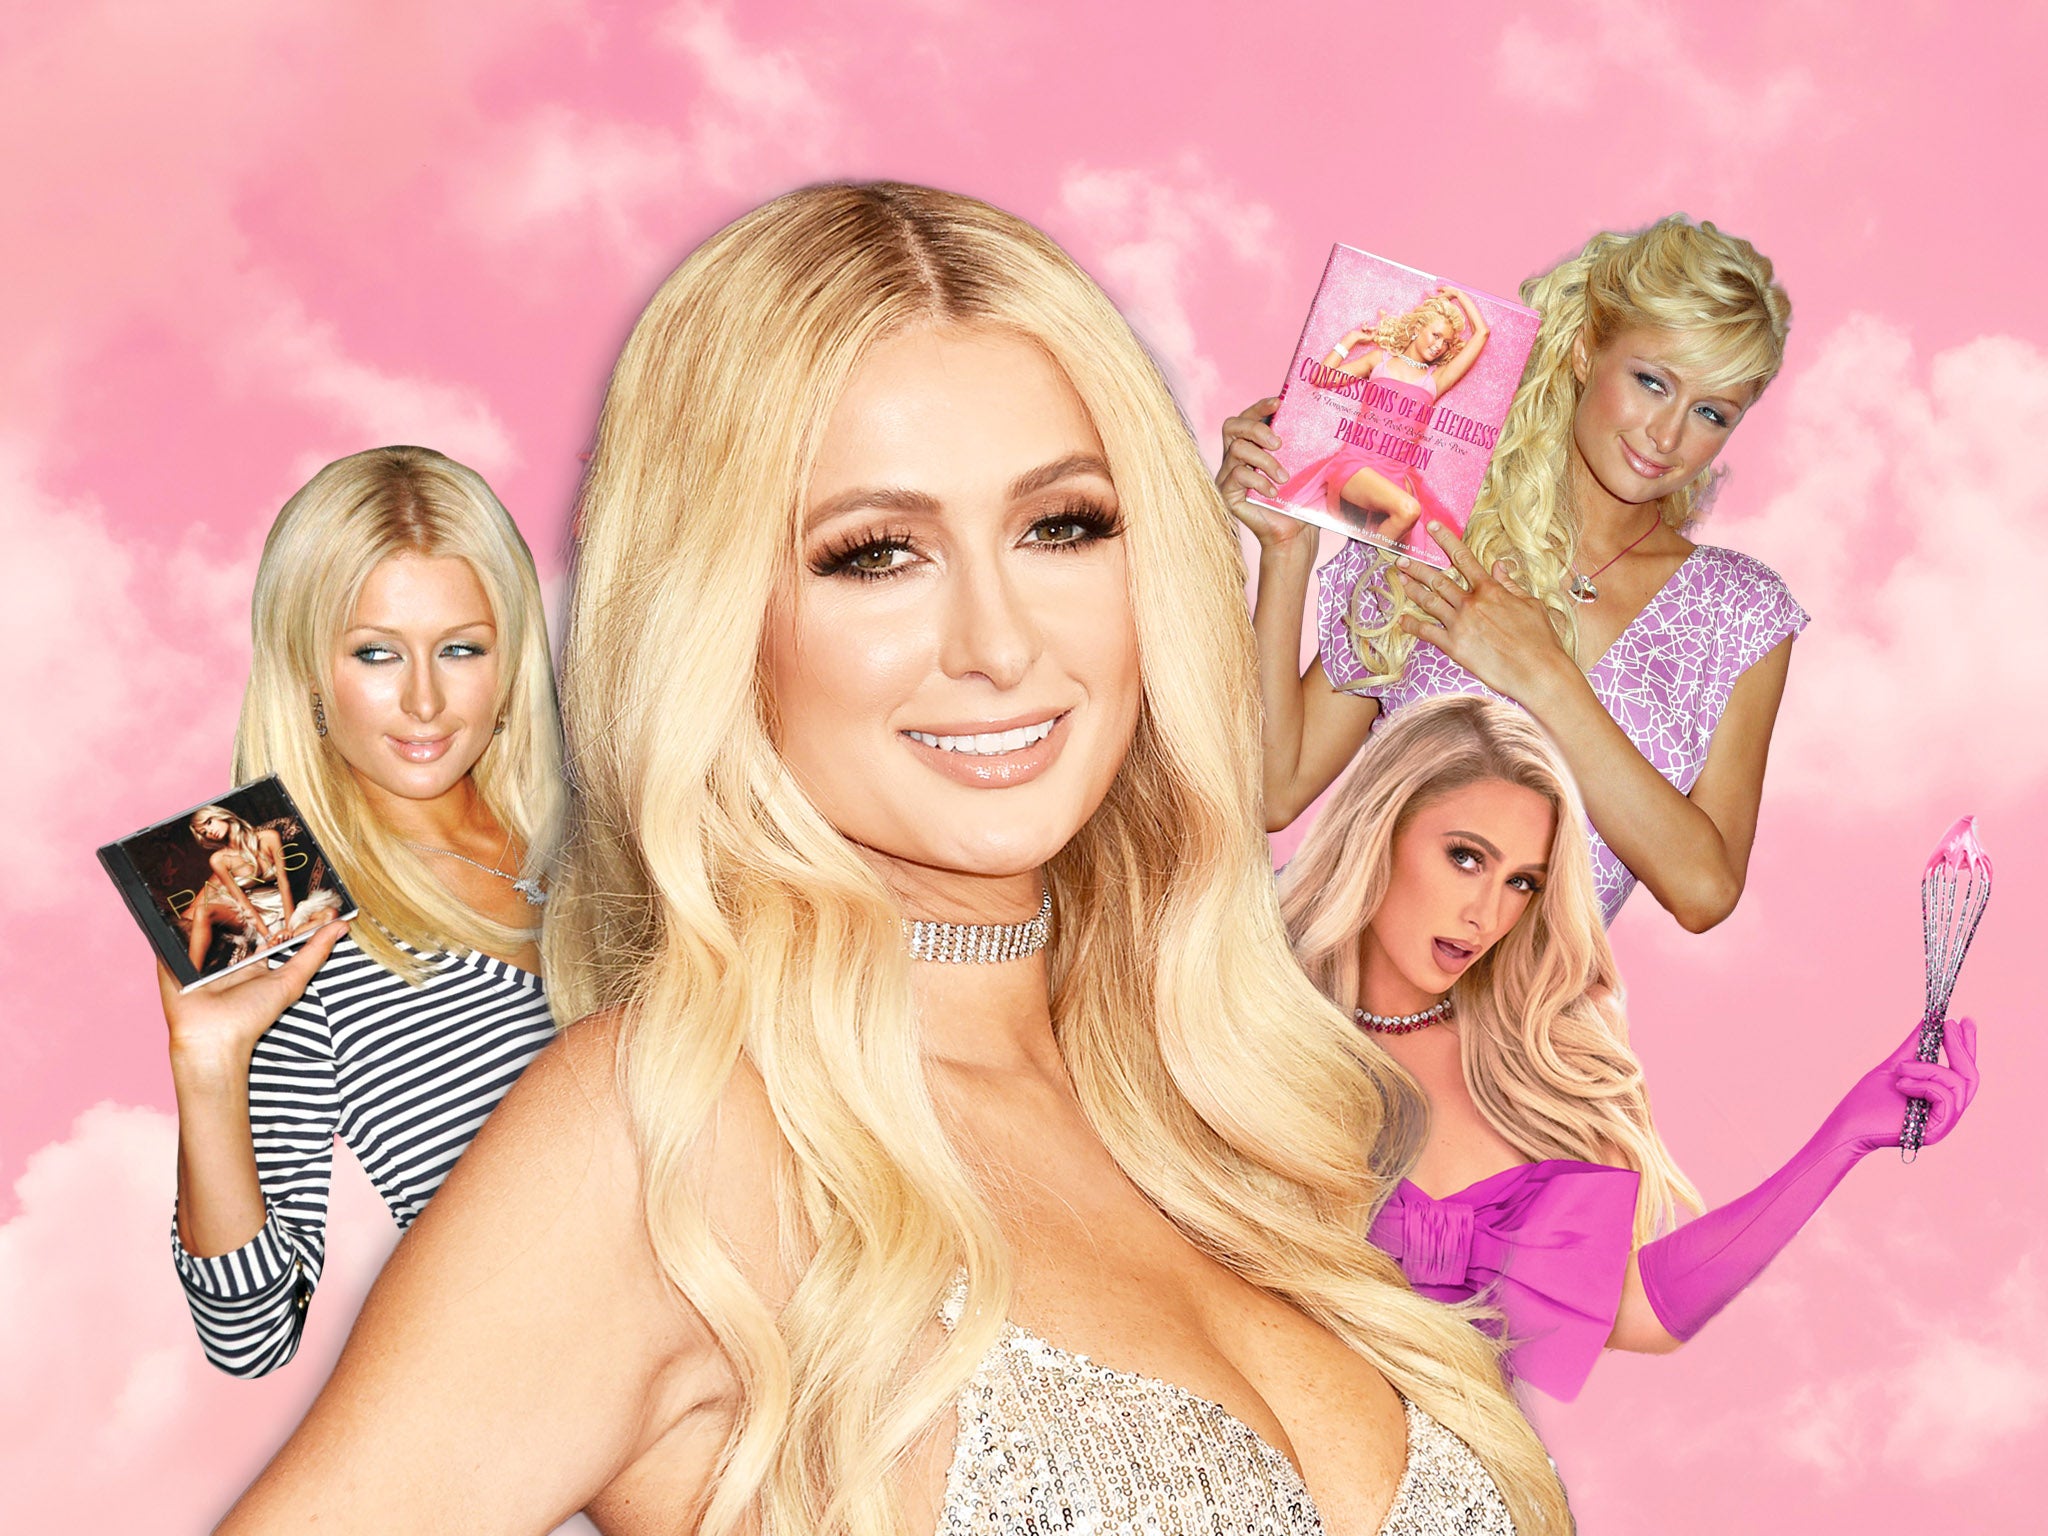 Paris Hilton has spent 20 years playing Paris Hilton, and were still captivated The Independent image